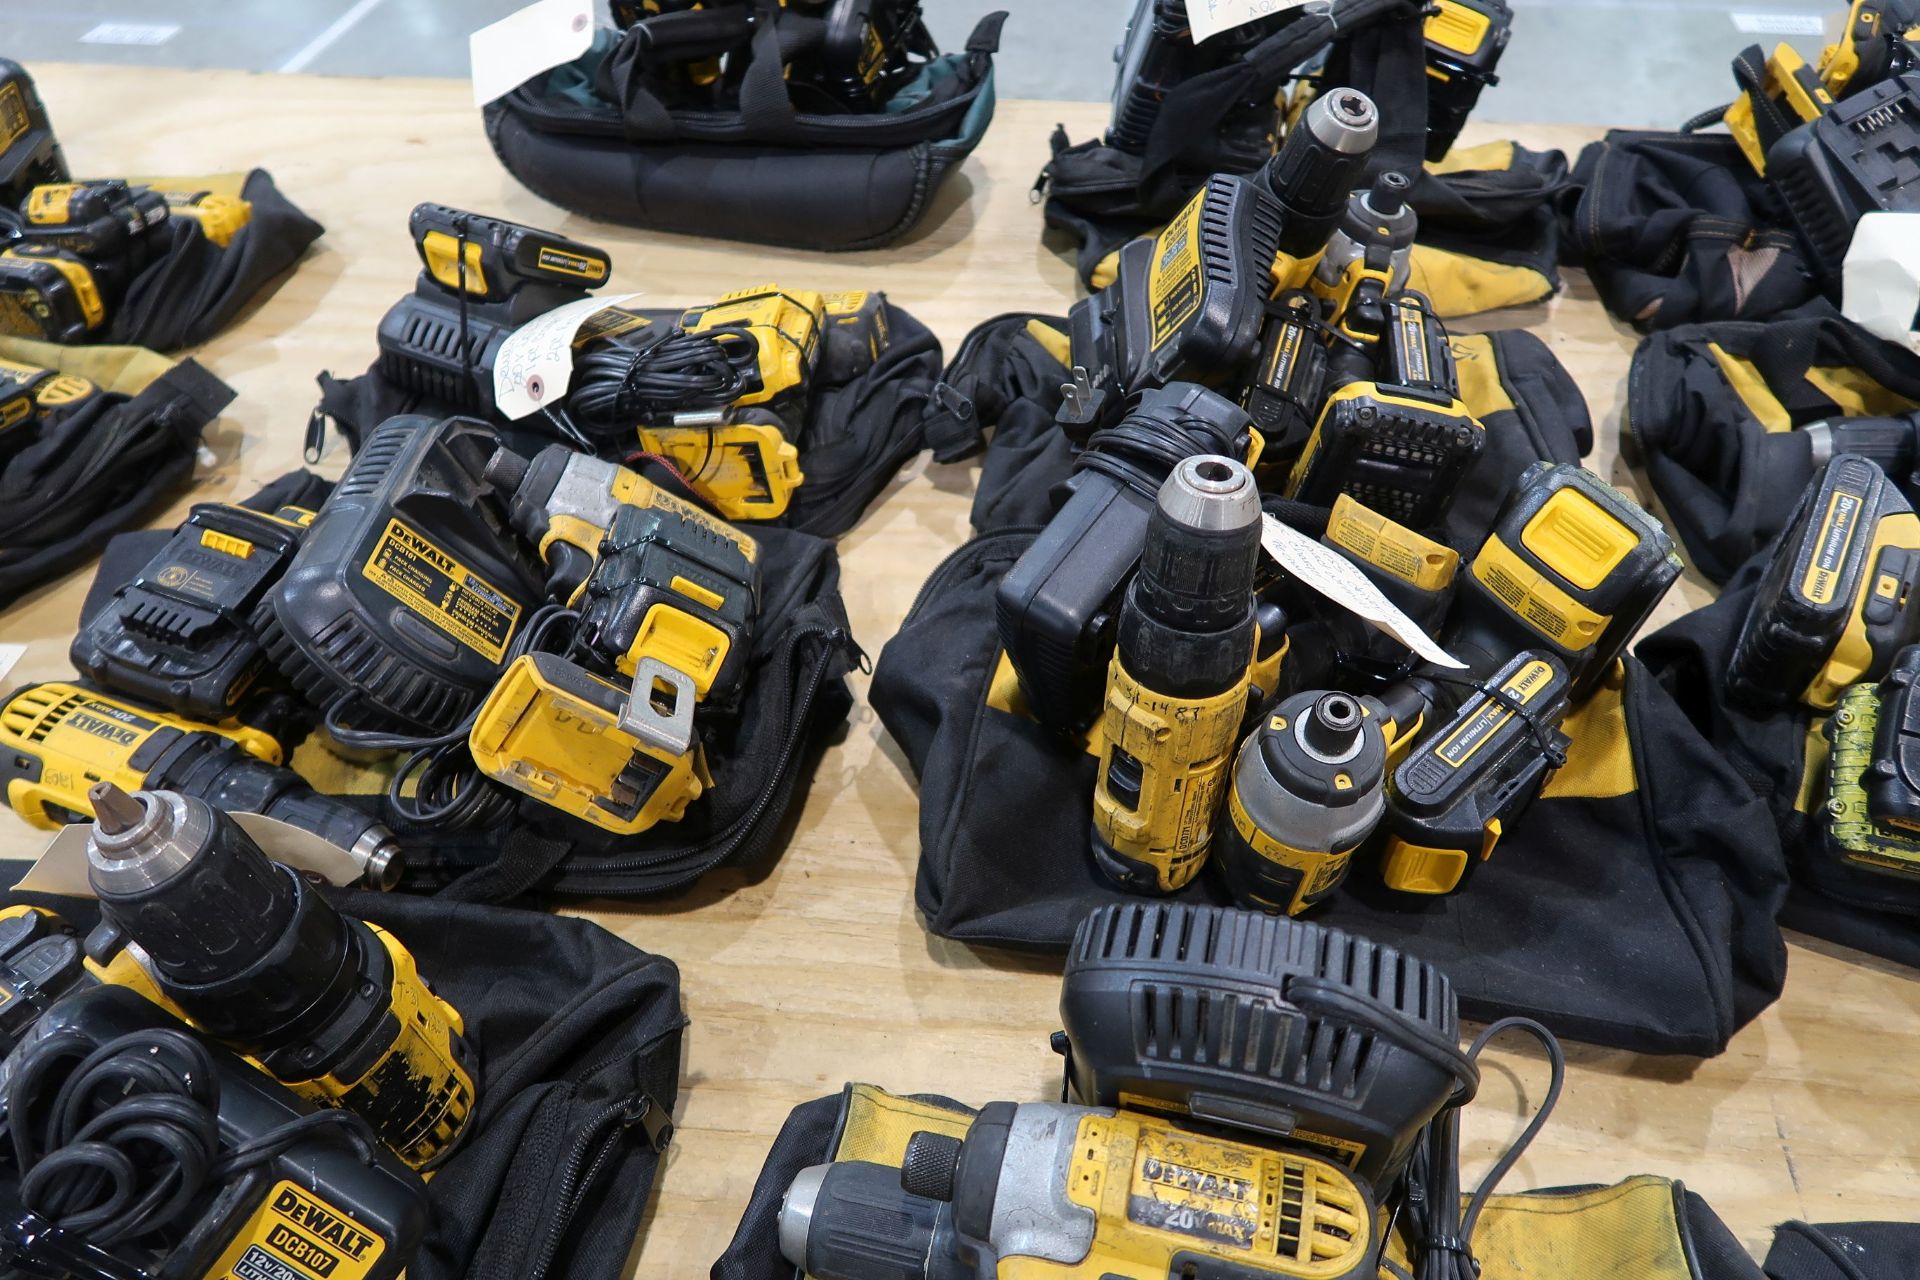 DEWALT 20 VOLT CORDLESS SCREWDRIVERS AND DRILL DRIVERS WITH CHARGERS - Image 3 of 3